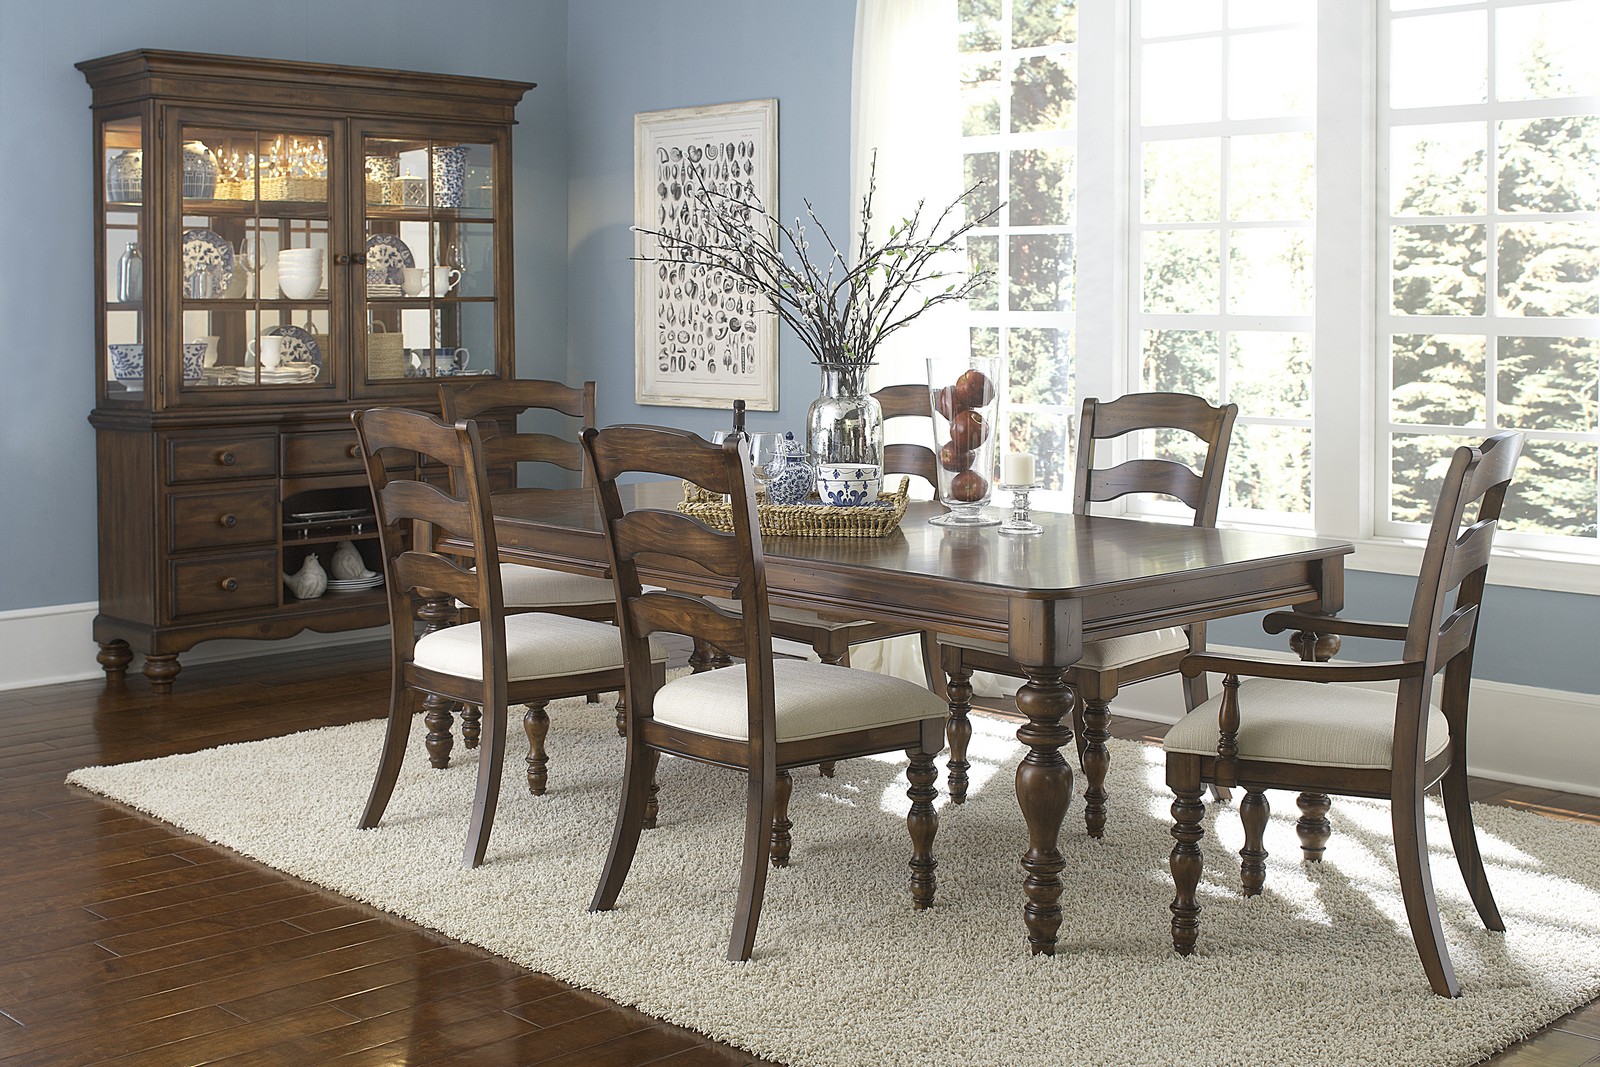 Hillsdale Pine Island 7 PC Dining Set with Ladder Back Side Chairs and Arm Chairs - Dark Pine